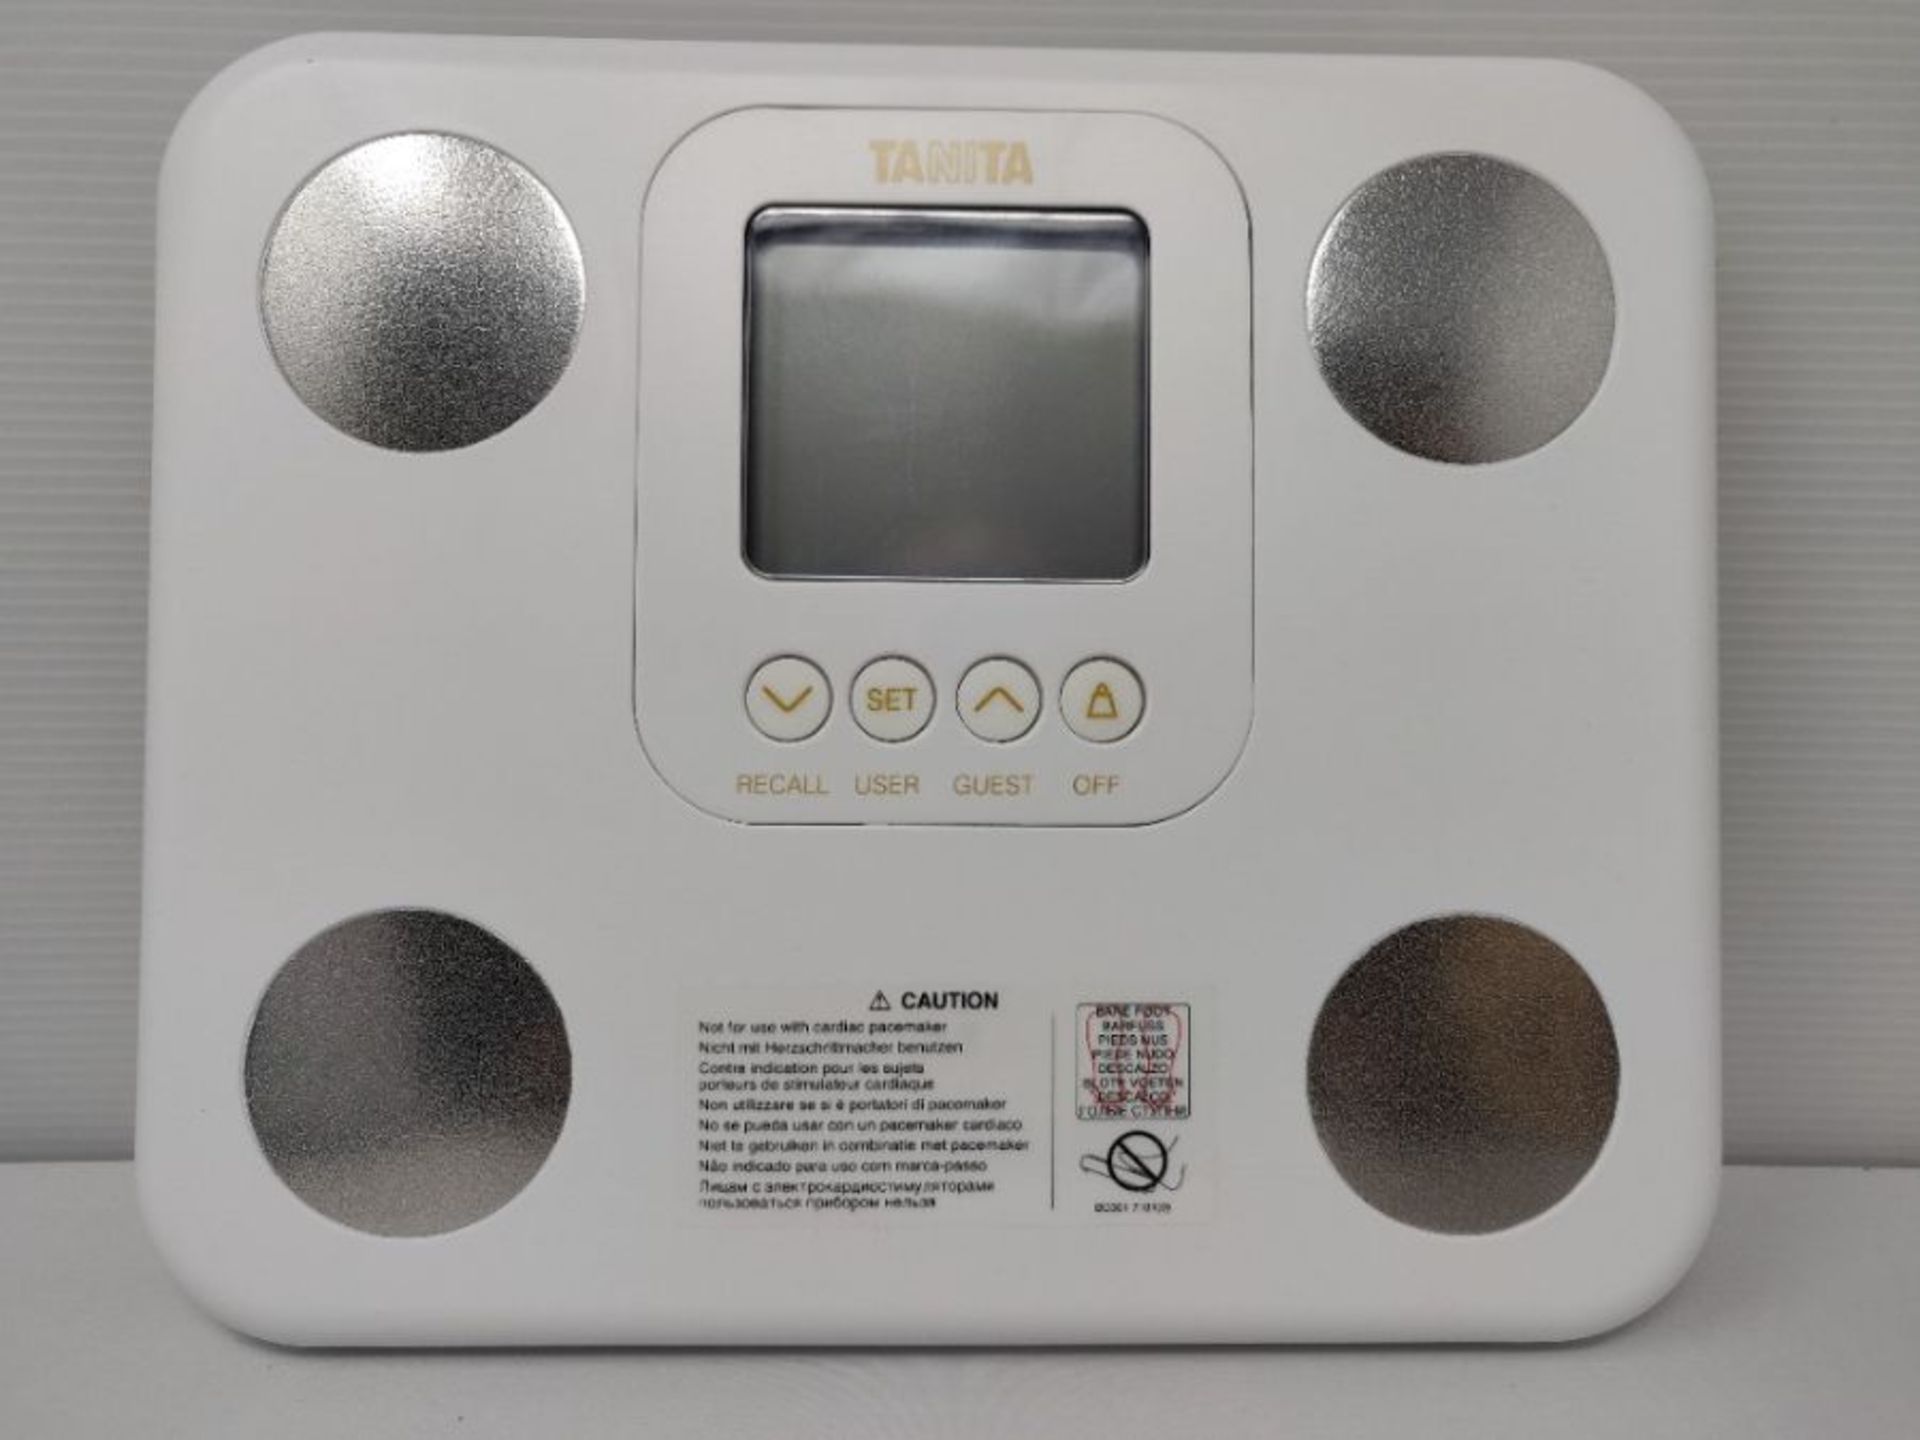 Tanita BC730W InnerScan Body Composition Monitor White - Image 2 of 2